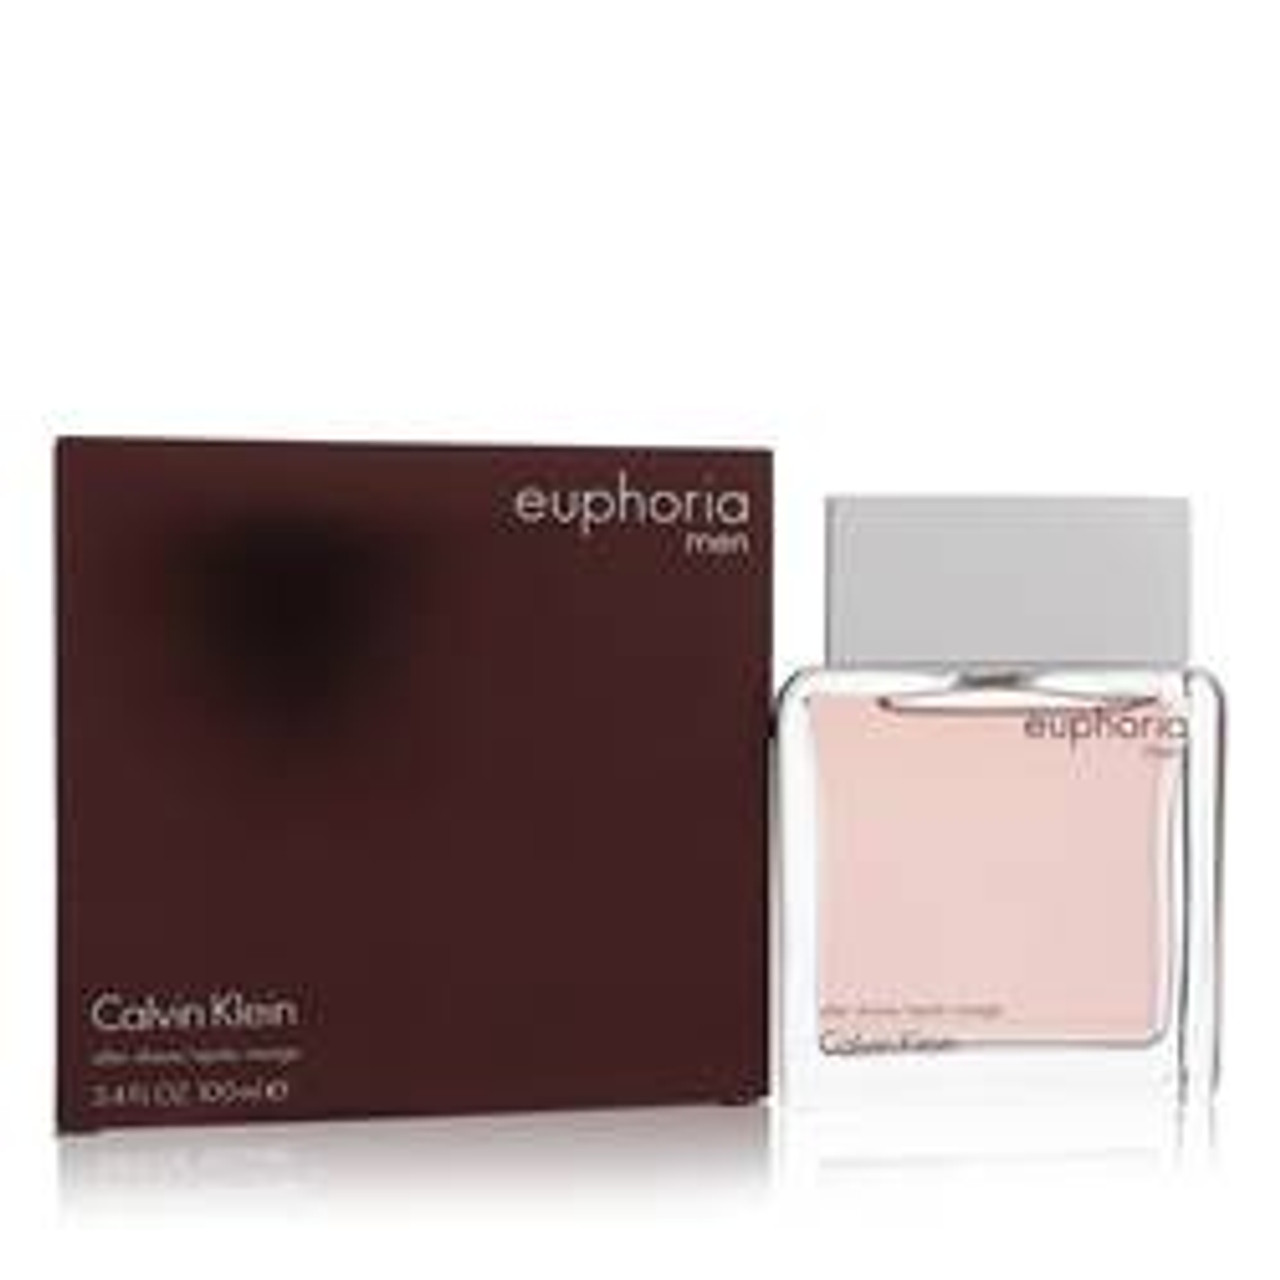 Euphoria Cologne By Calvin Klein After Shave 3.4 oz for Men - [From 75.00 - Choose pk Qty ] - *Ships from Miami